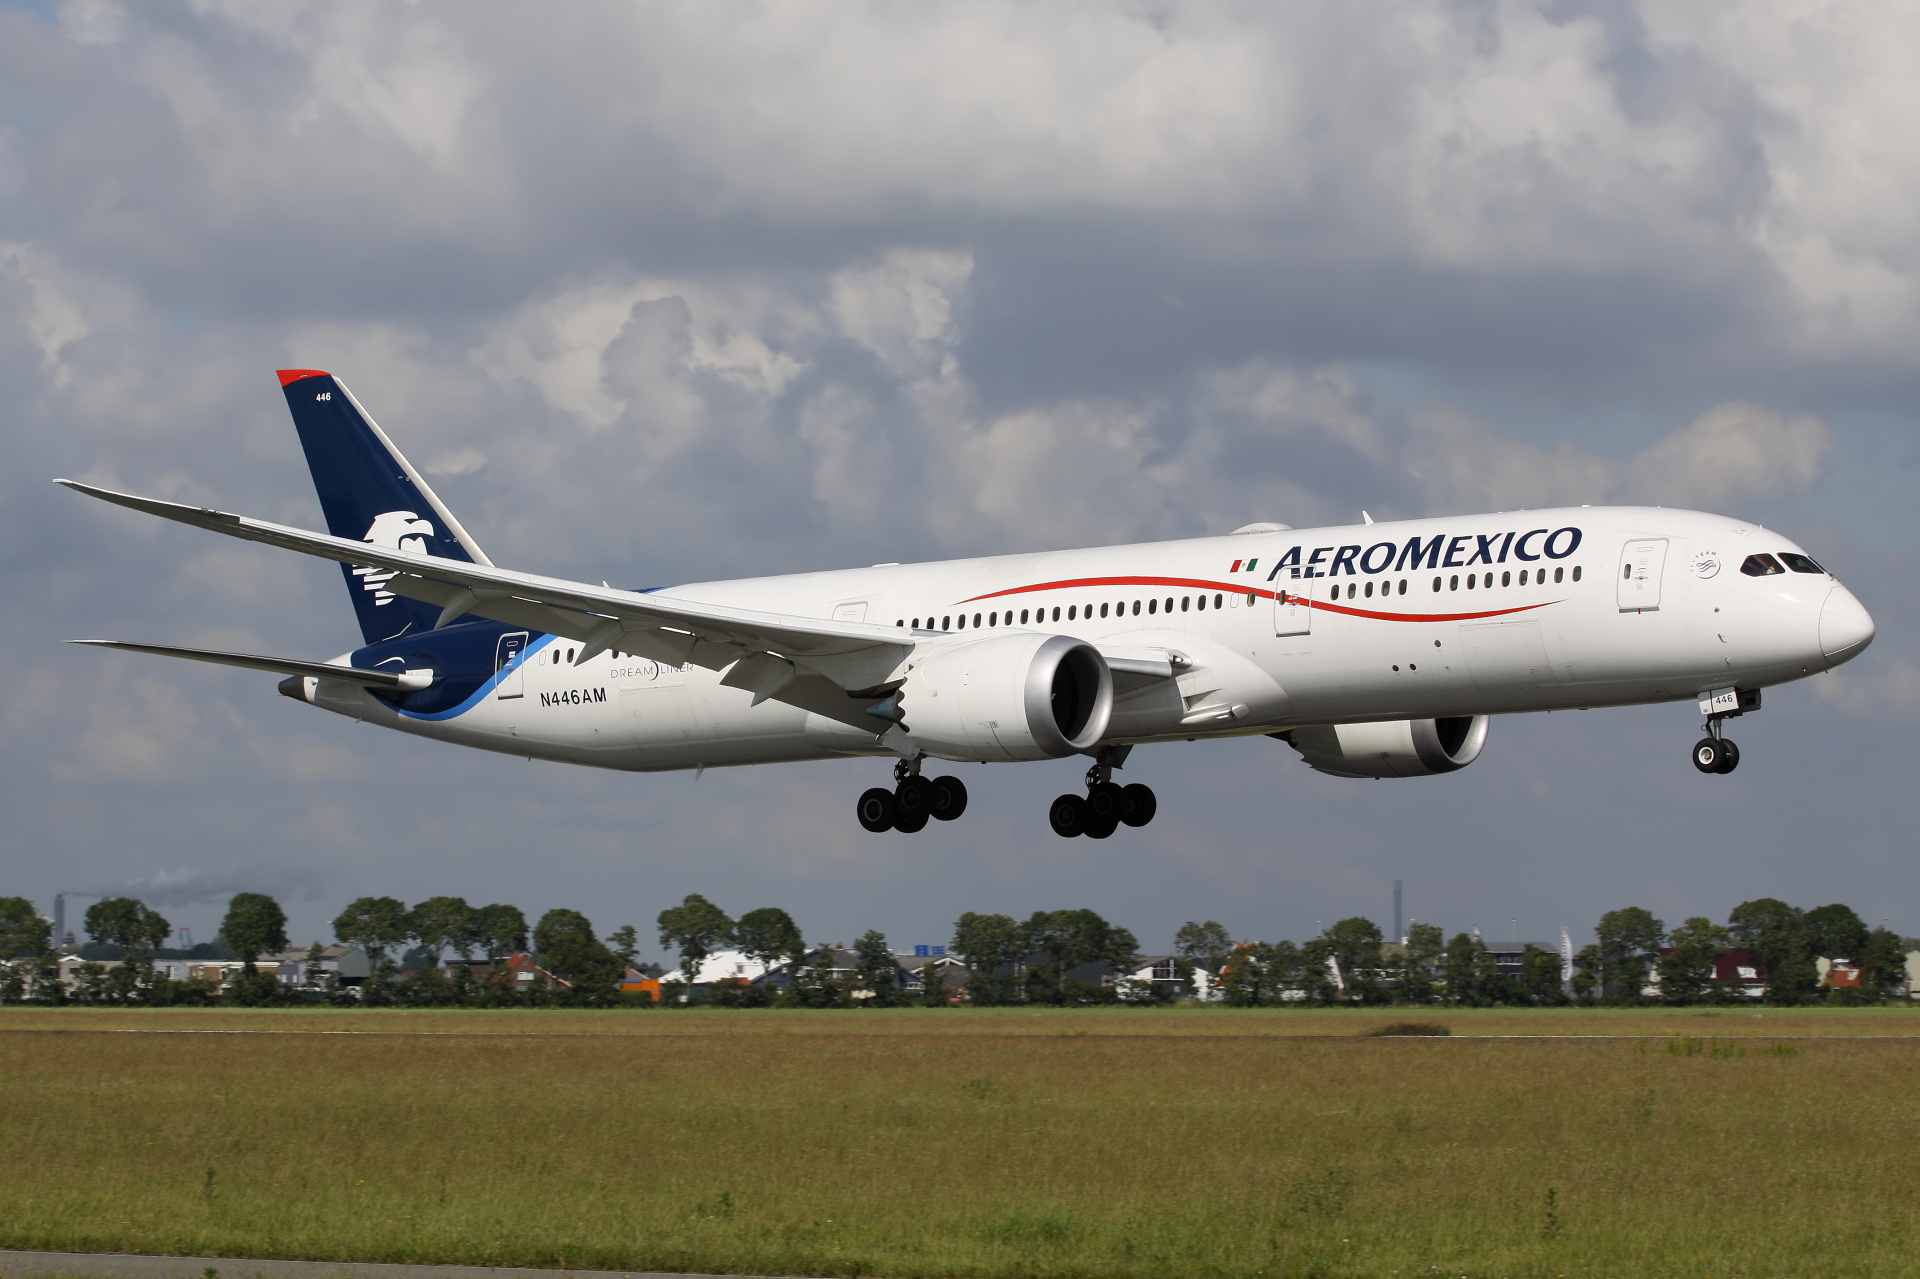 N446AM, AeroMexico (Aircraft » Schiphol Spotting » Boeing 787-9 Dreamliner)